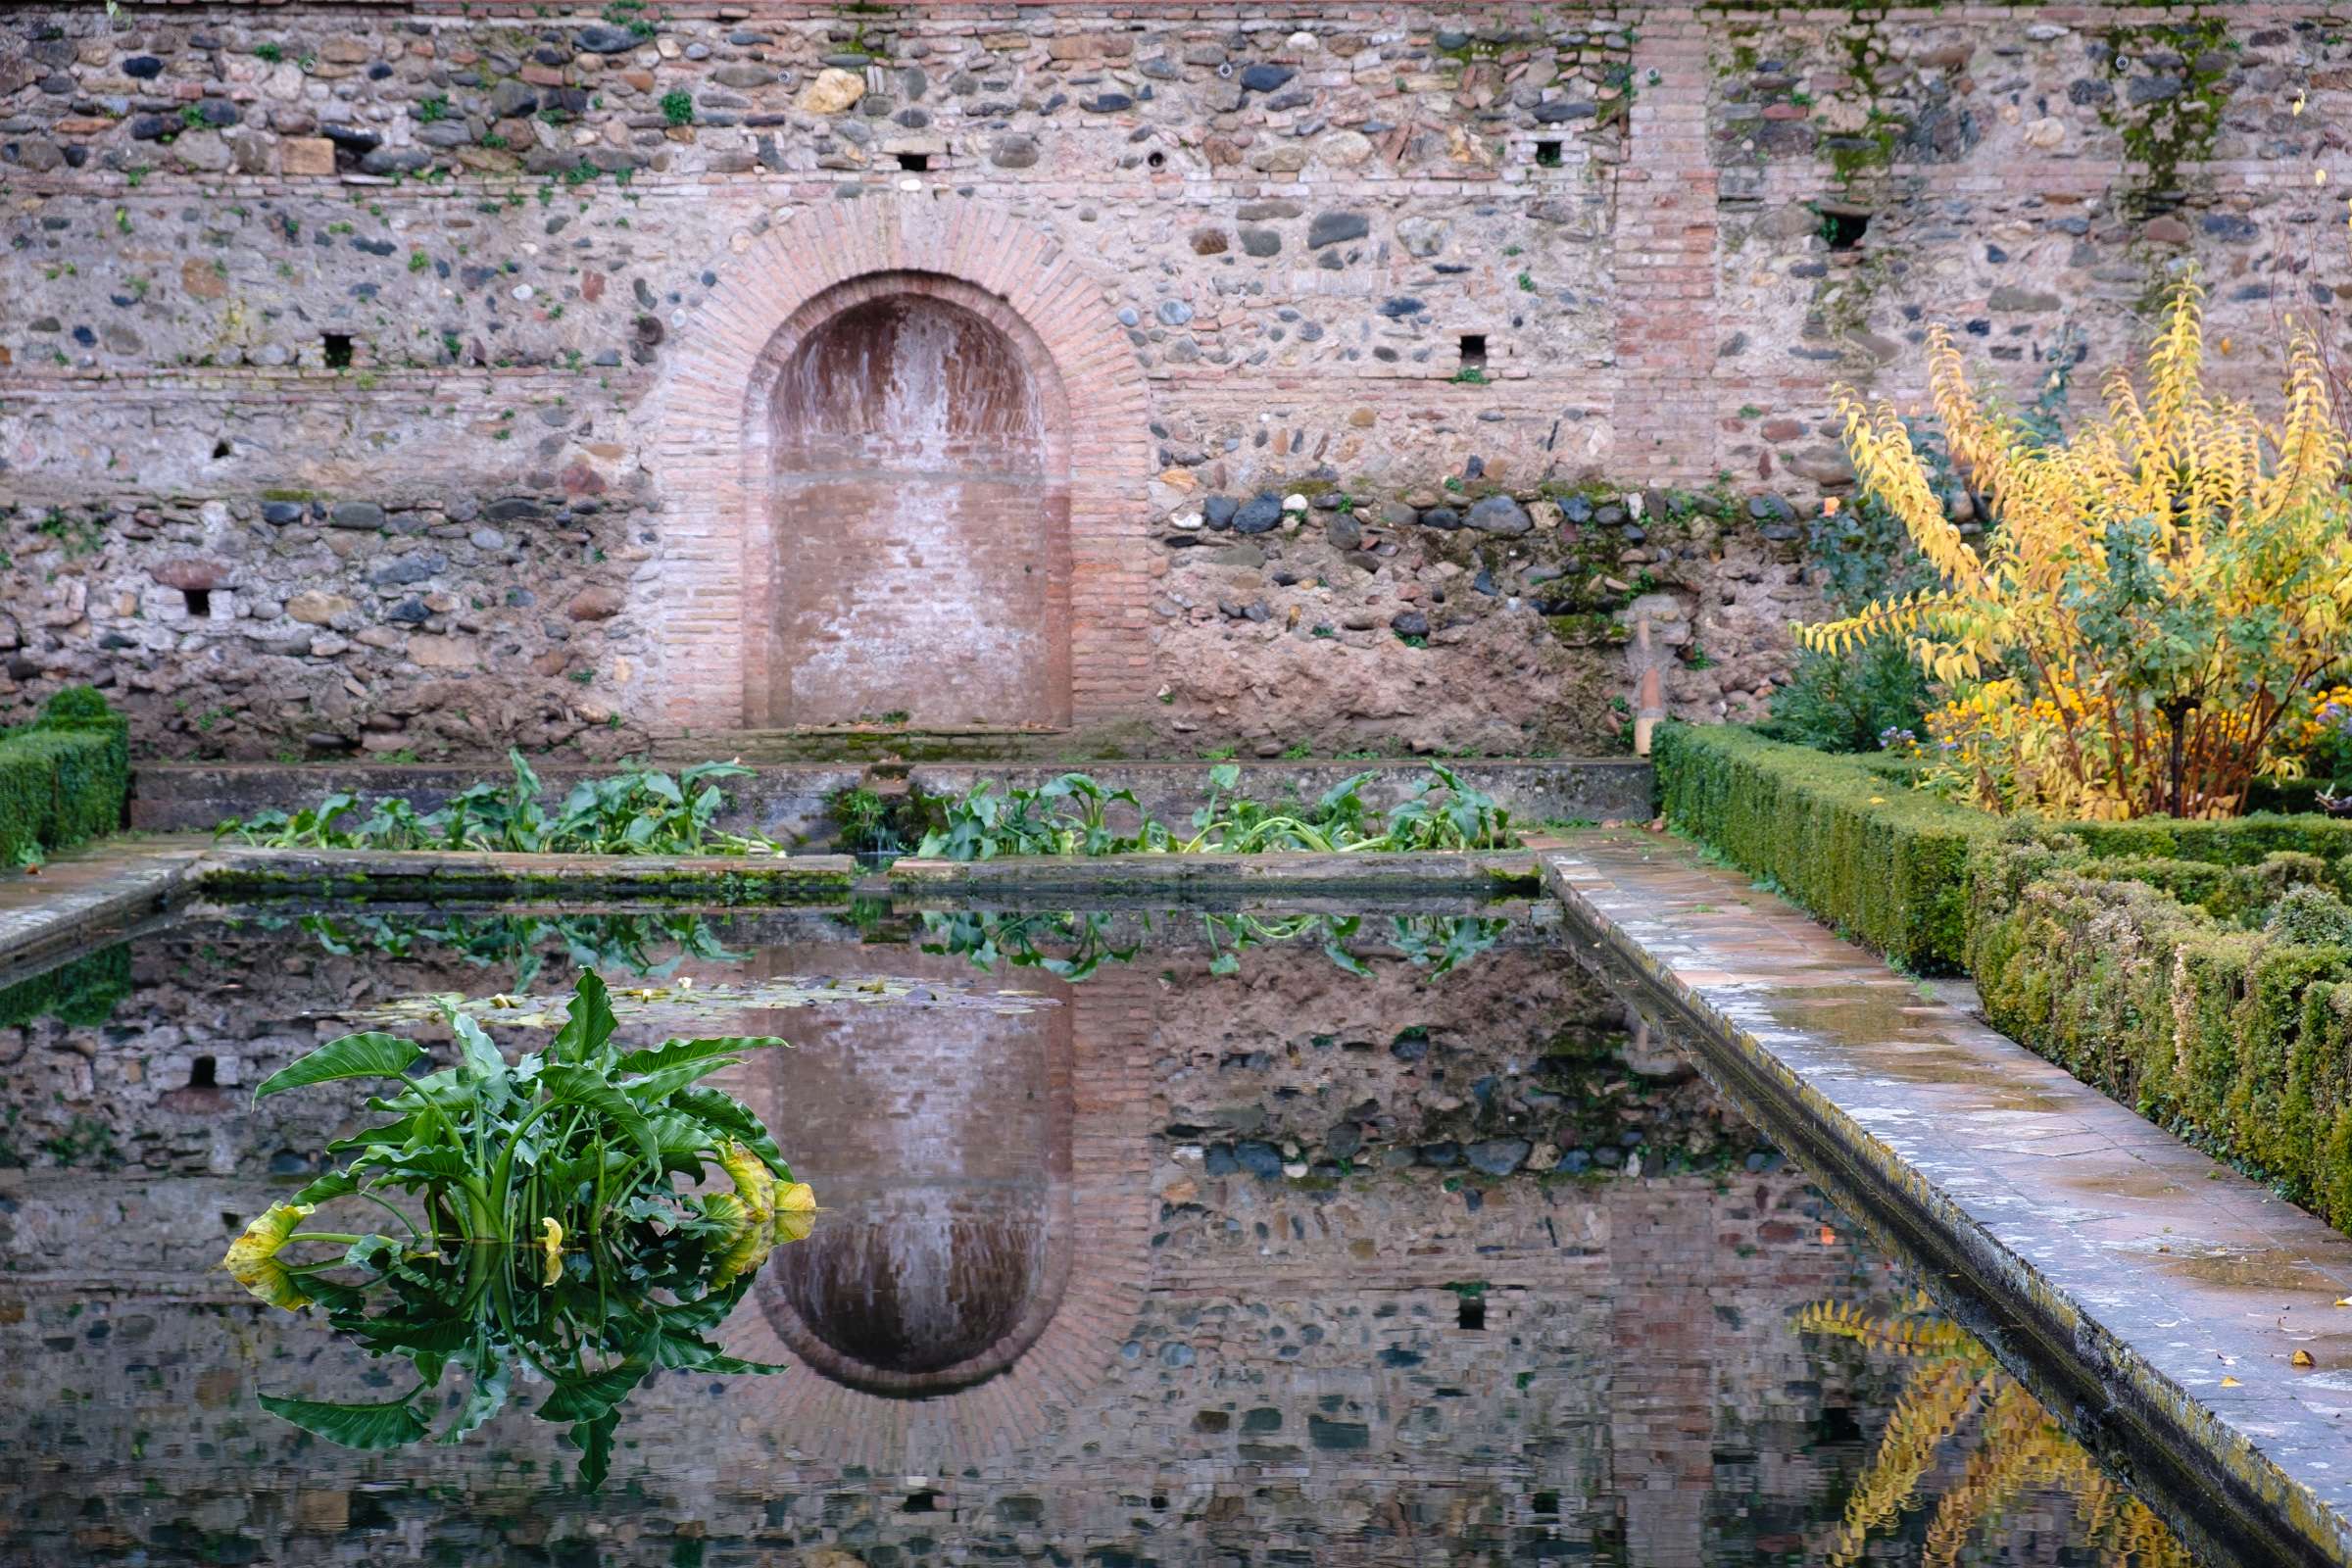 Perfect still reflections in a pond, The Alhambra, Granada